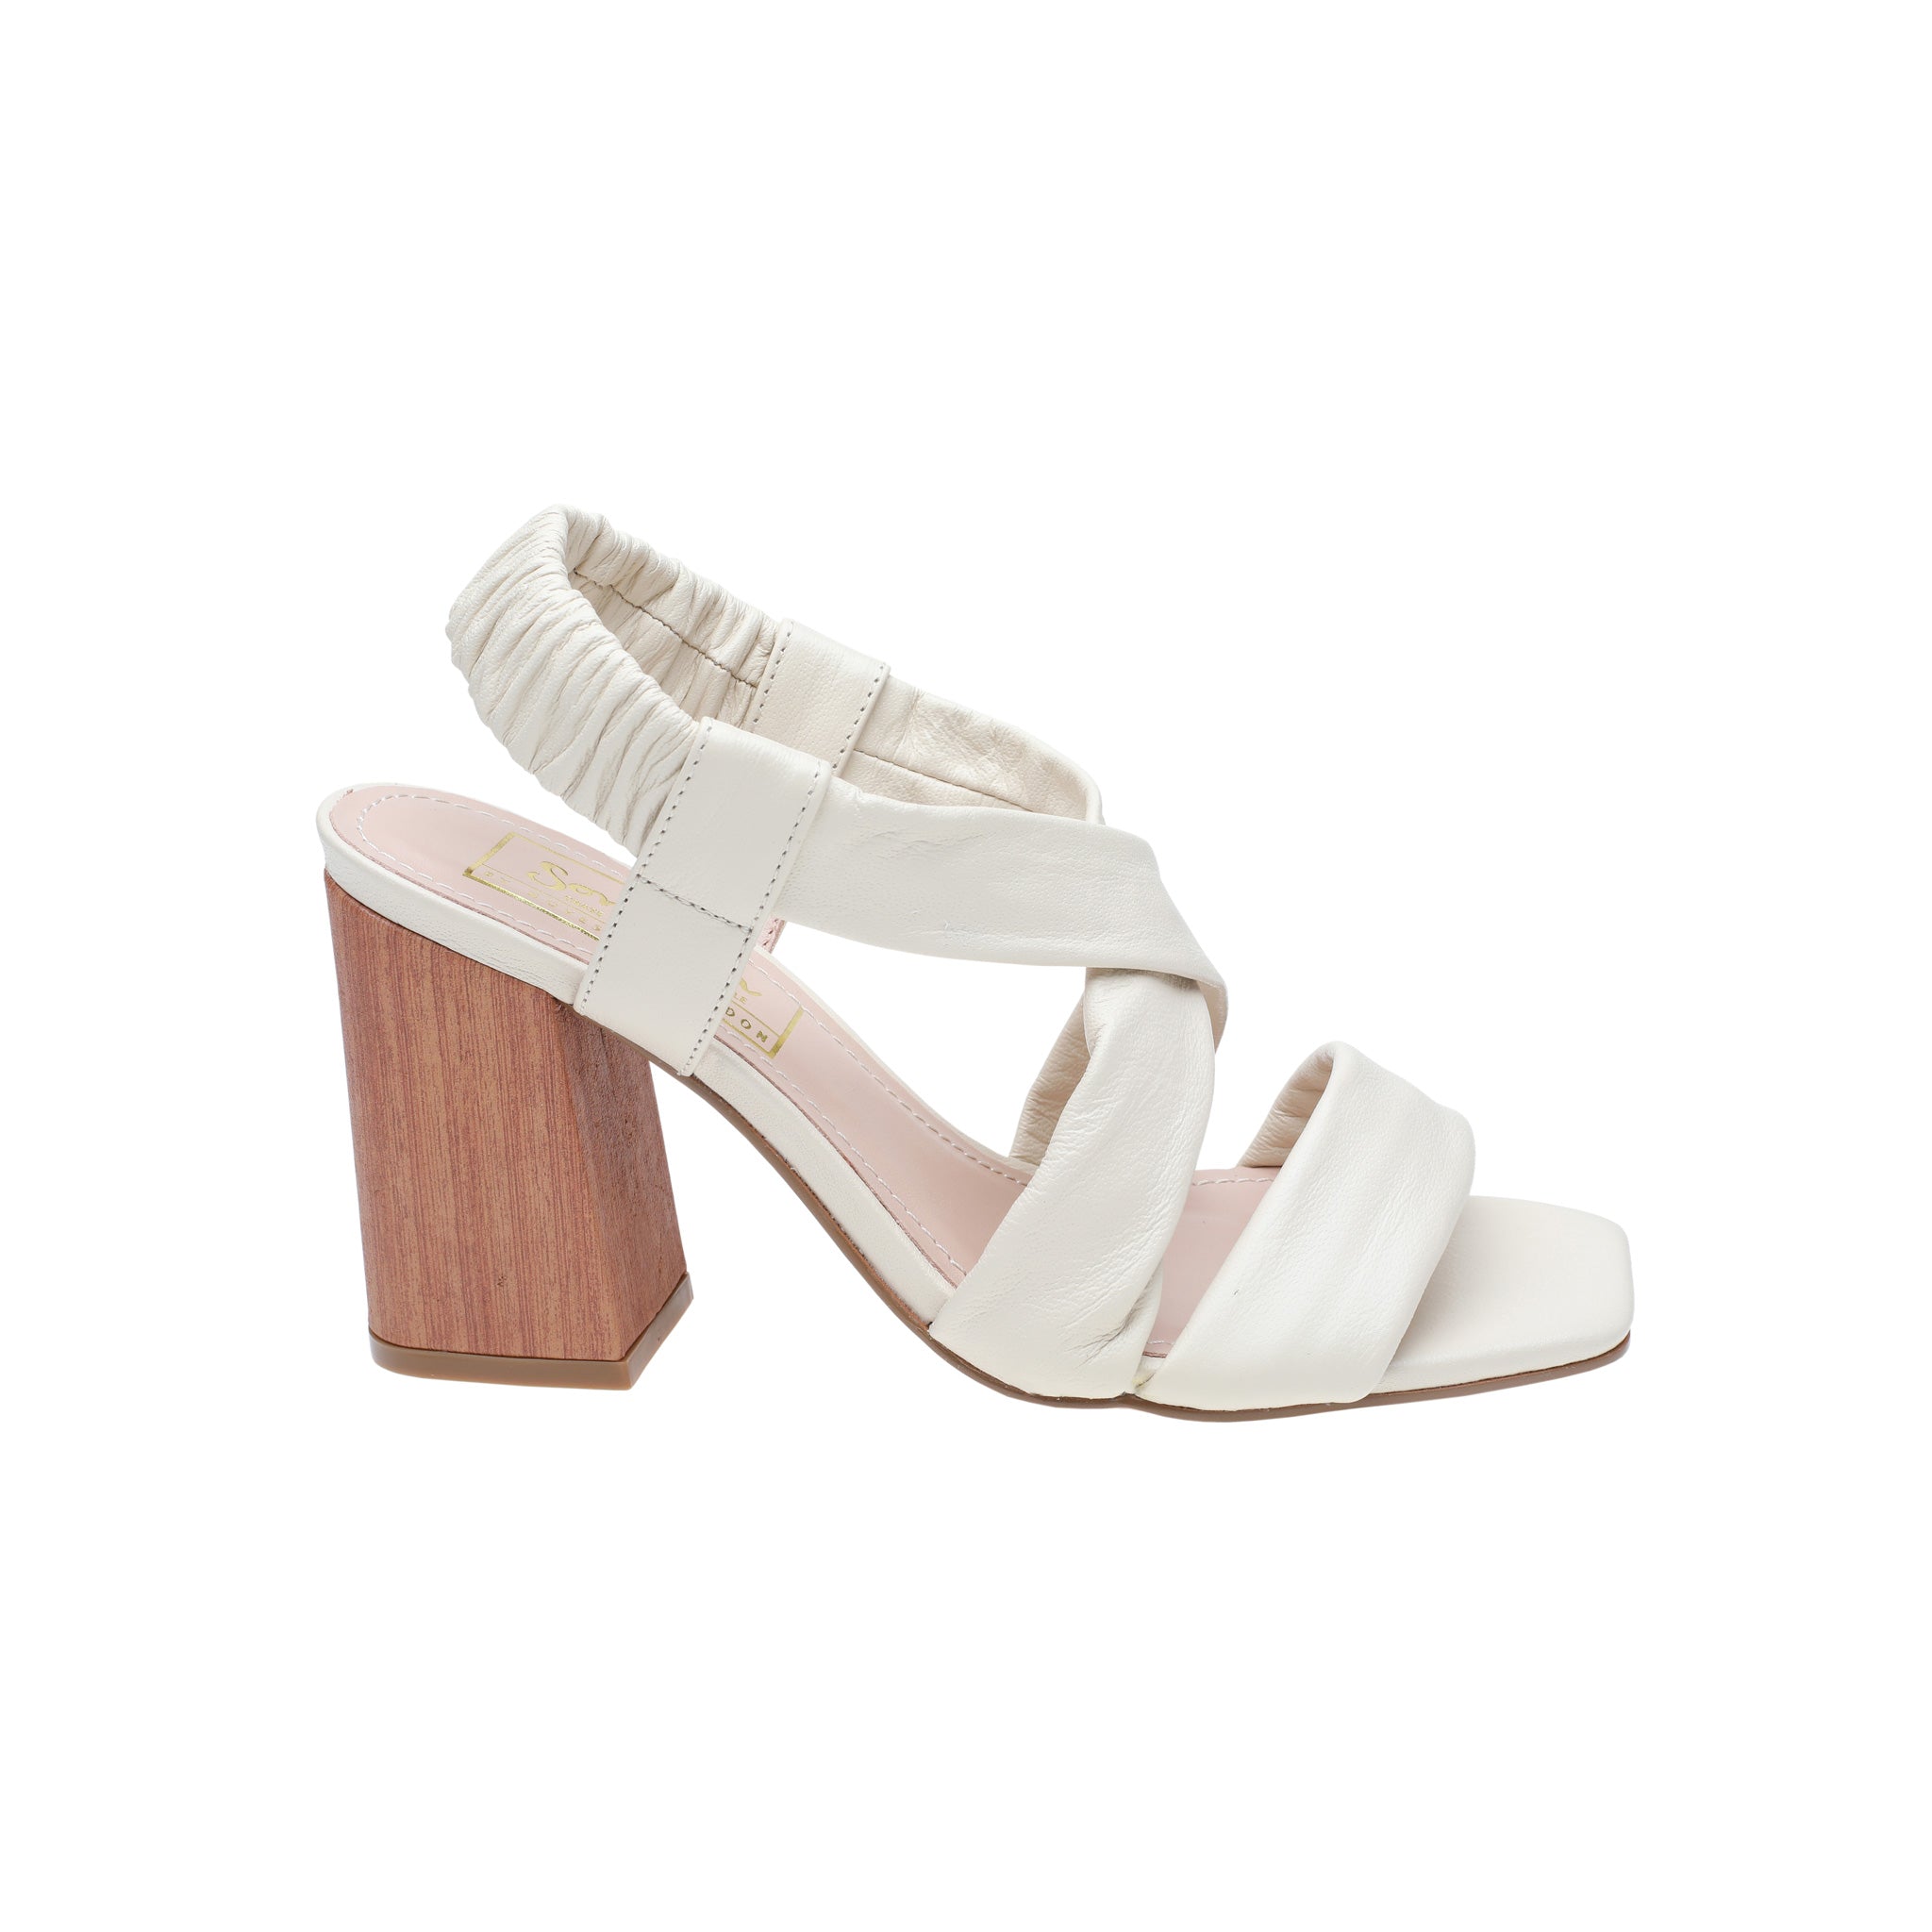 Off White Leather Cross Over Sandals